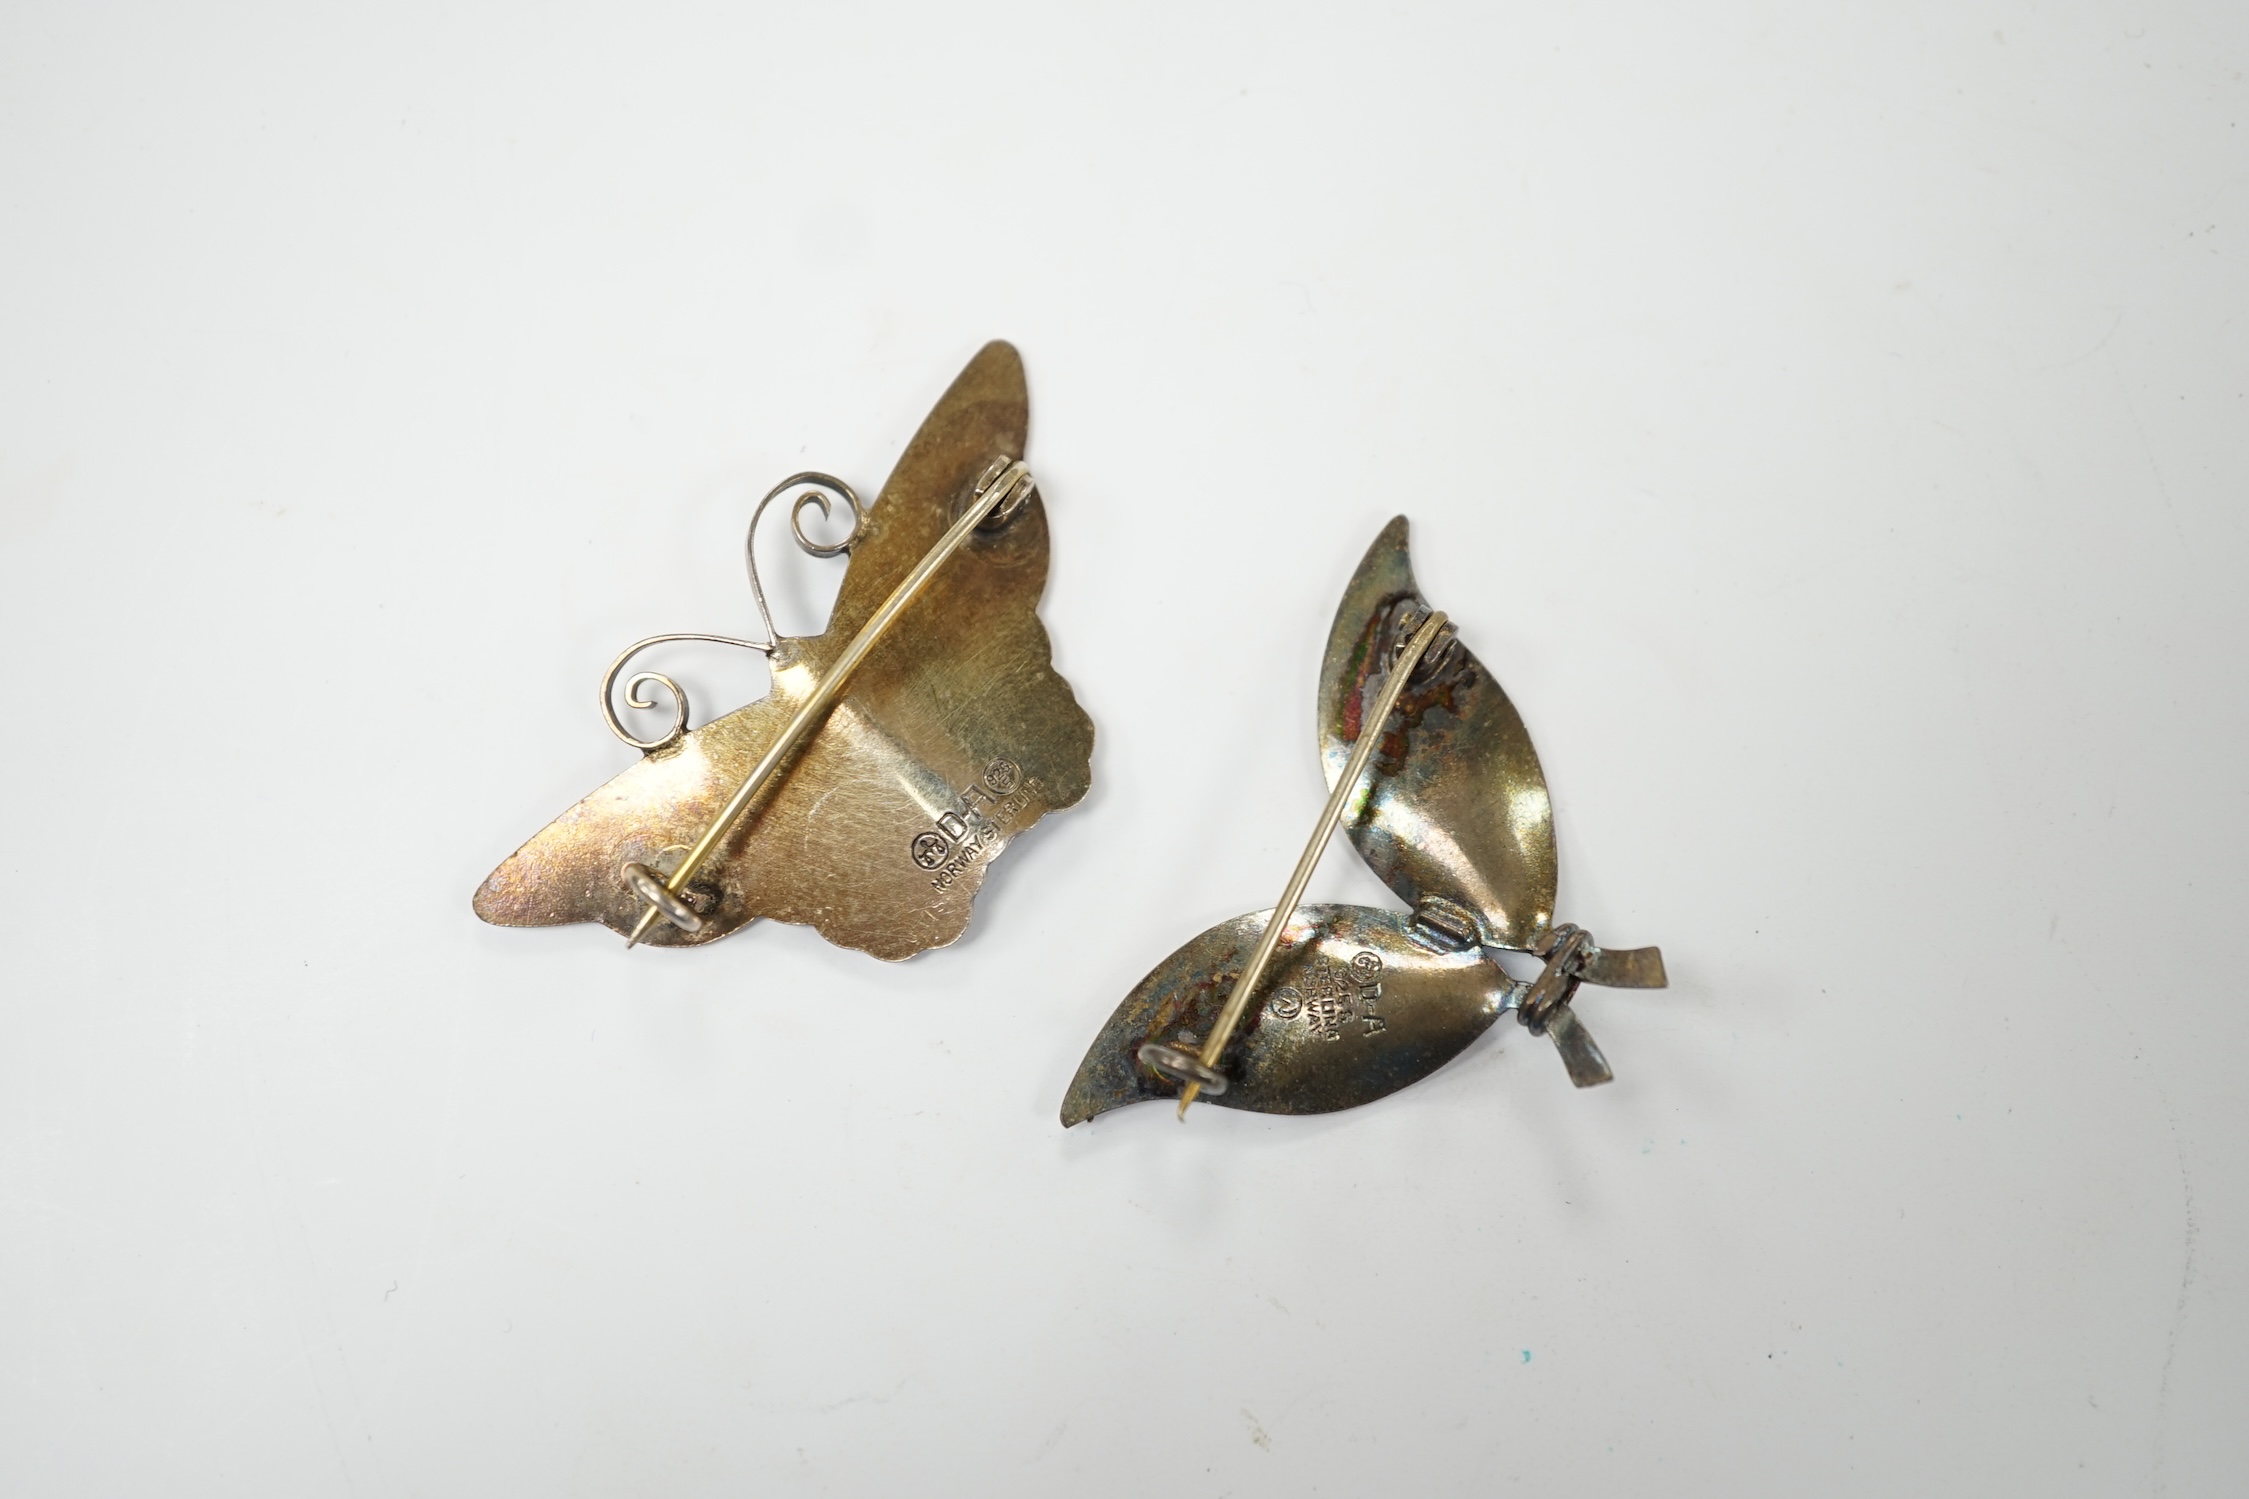 A 20th century Norwegian sterling and blue enamel set butterfly brooch by David Andersen, width 43mm and a similar double leaf brooch by David Andersen. Good condition.